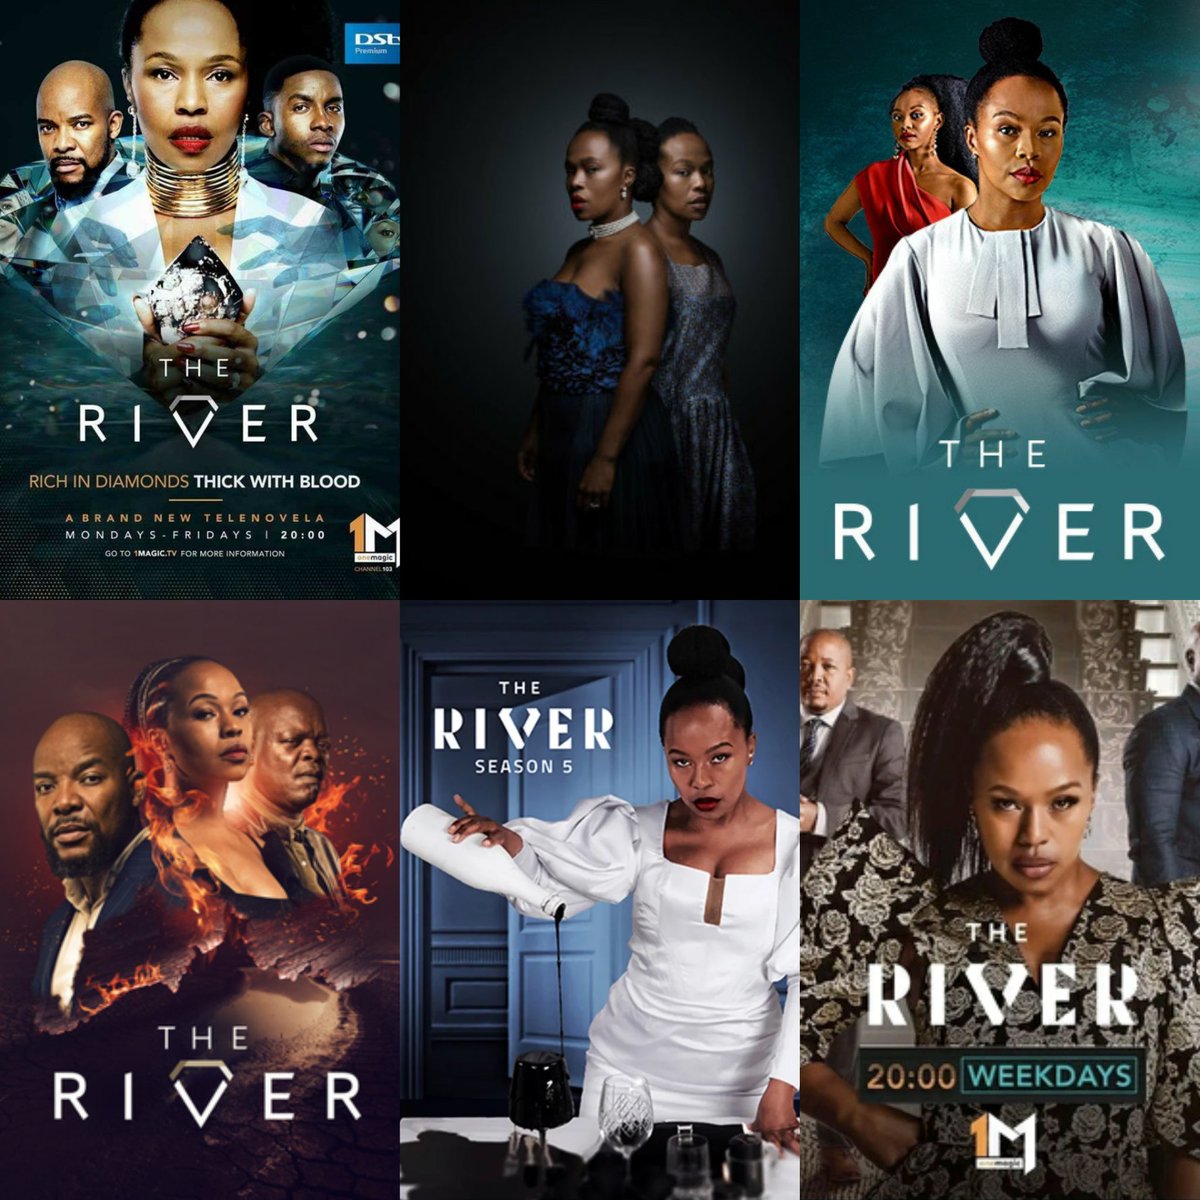 'When the sun goes down and the band won't play. I'll always remember us this way' 🎬❤️🫶 #TheRiver1Magic